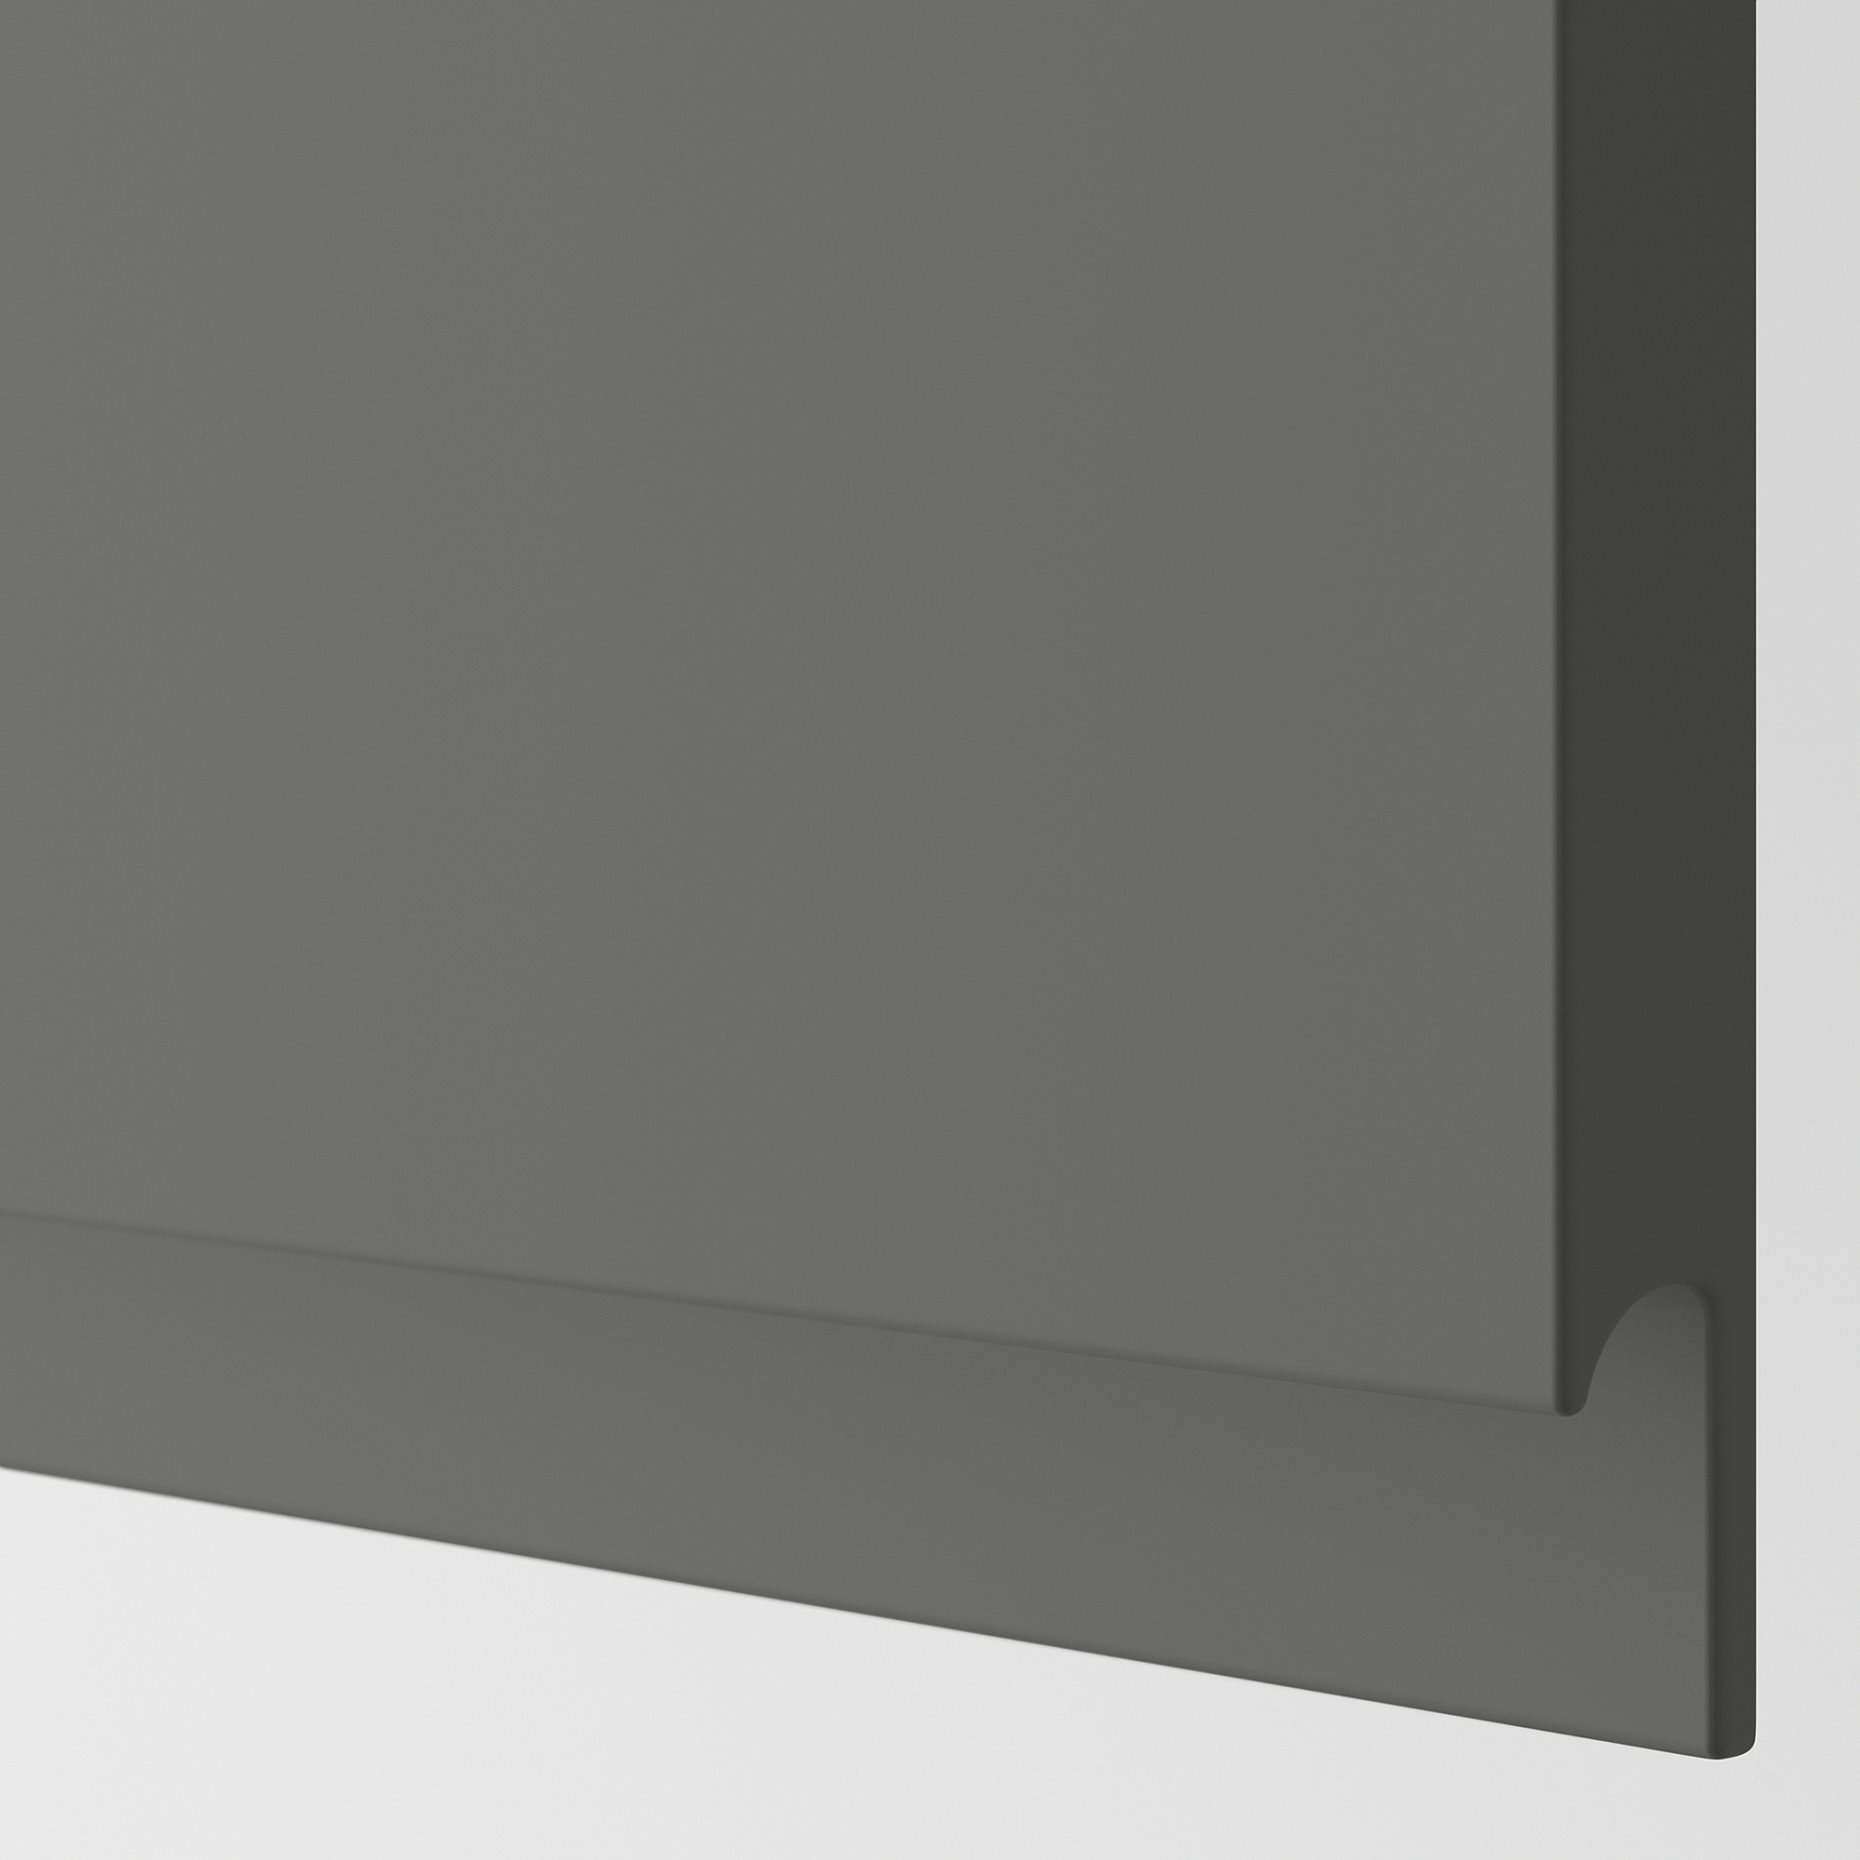 METOD, wall cabinet with shelves, 40x60 cm, 894.566.66